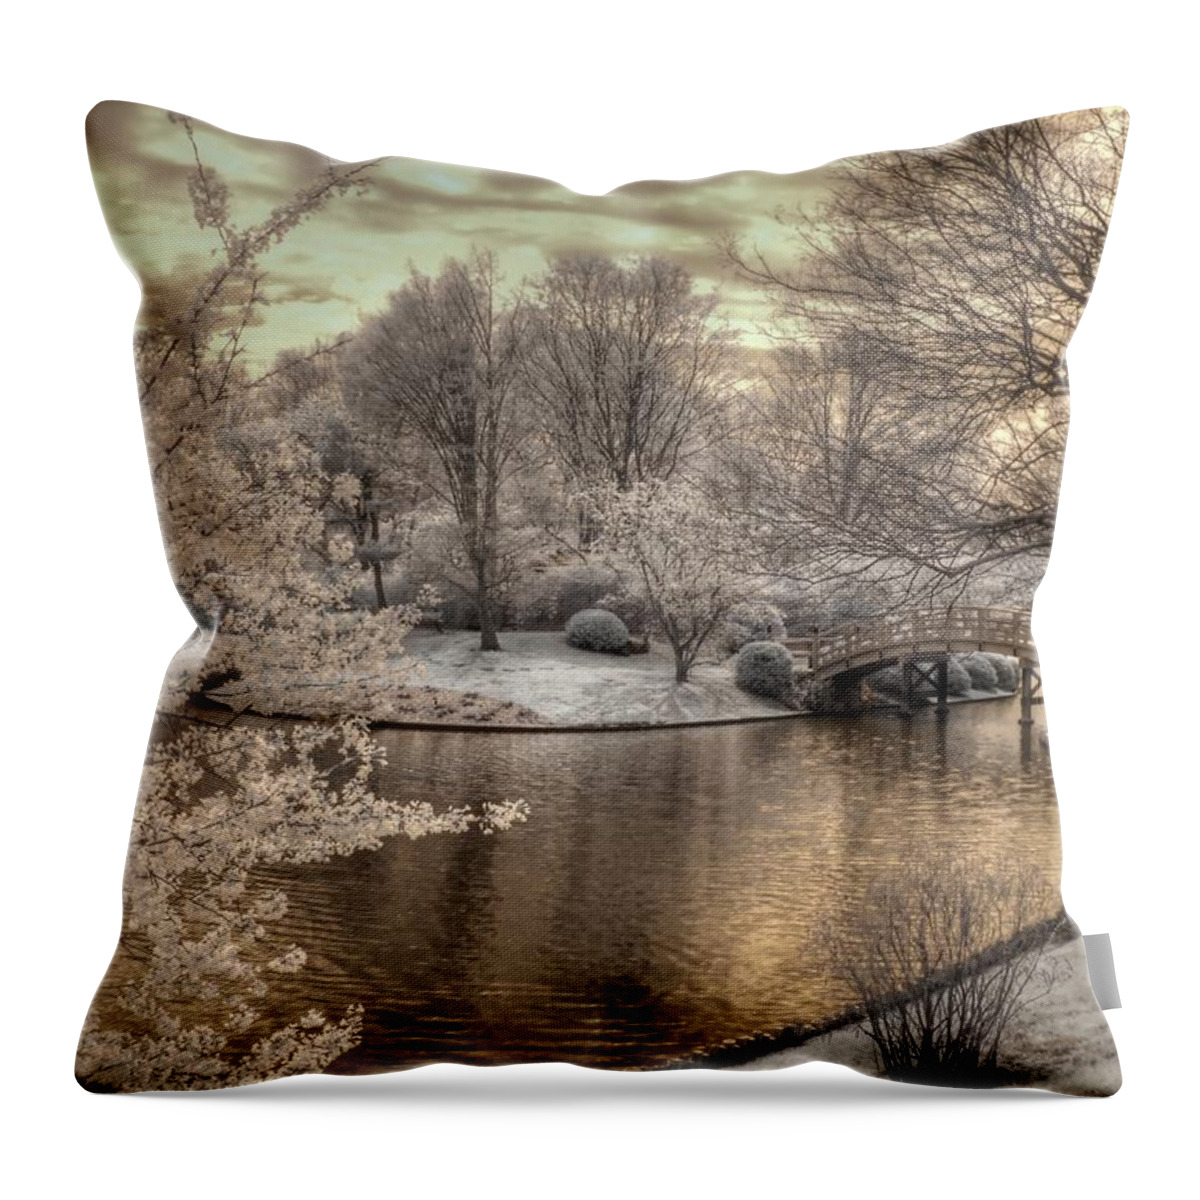 Japanese Garden Throw Pillow featuring the photograph Japanese Garden by Jane Linders